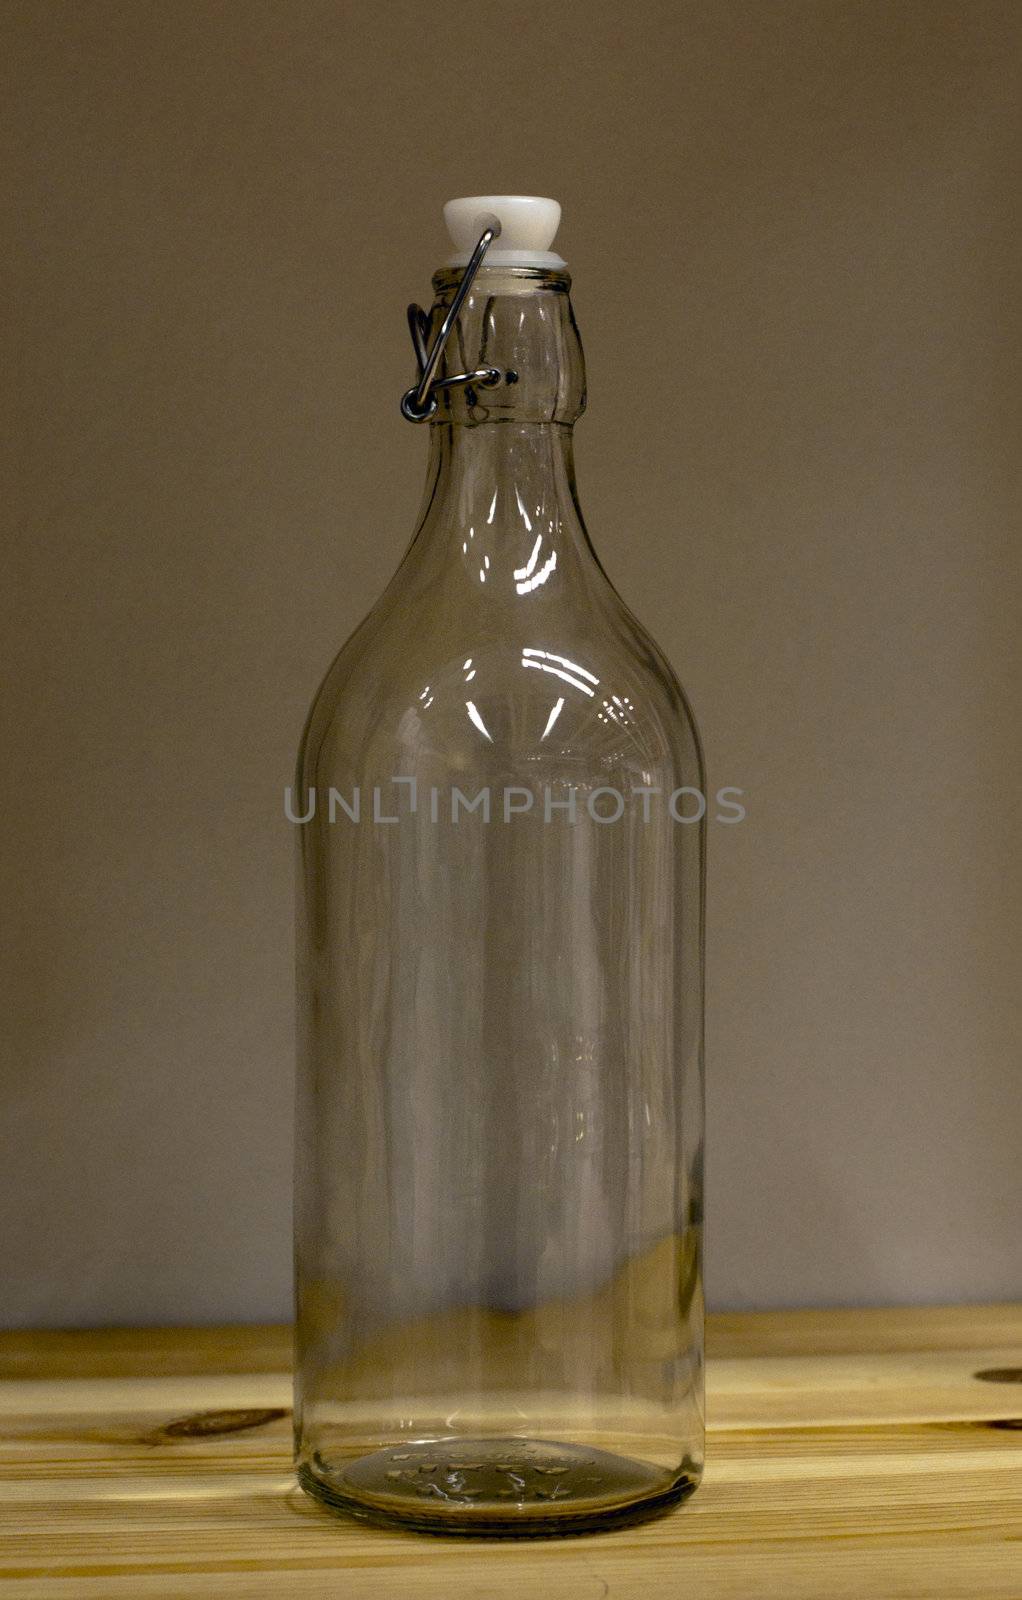 transparant bottle on a wooden shelf by compuinfoto